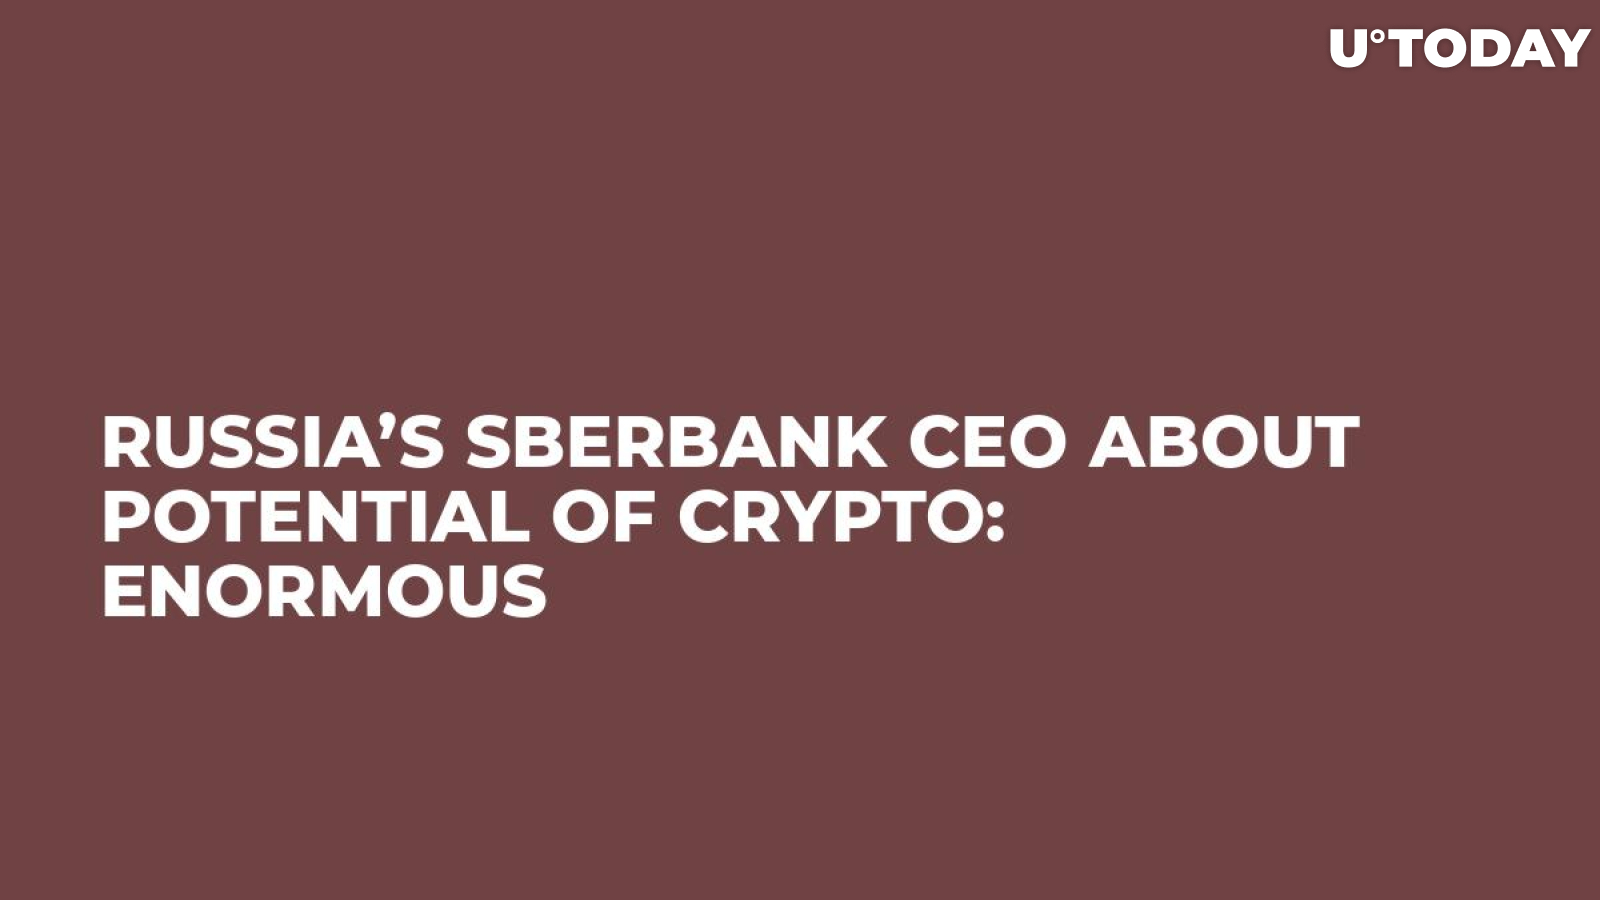 Russia’s Sberbank CEO about Potential of Crypto: Enormous